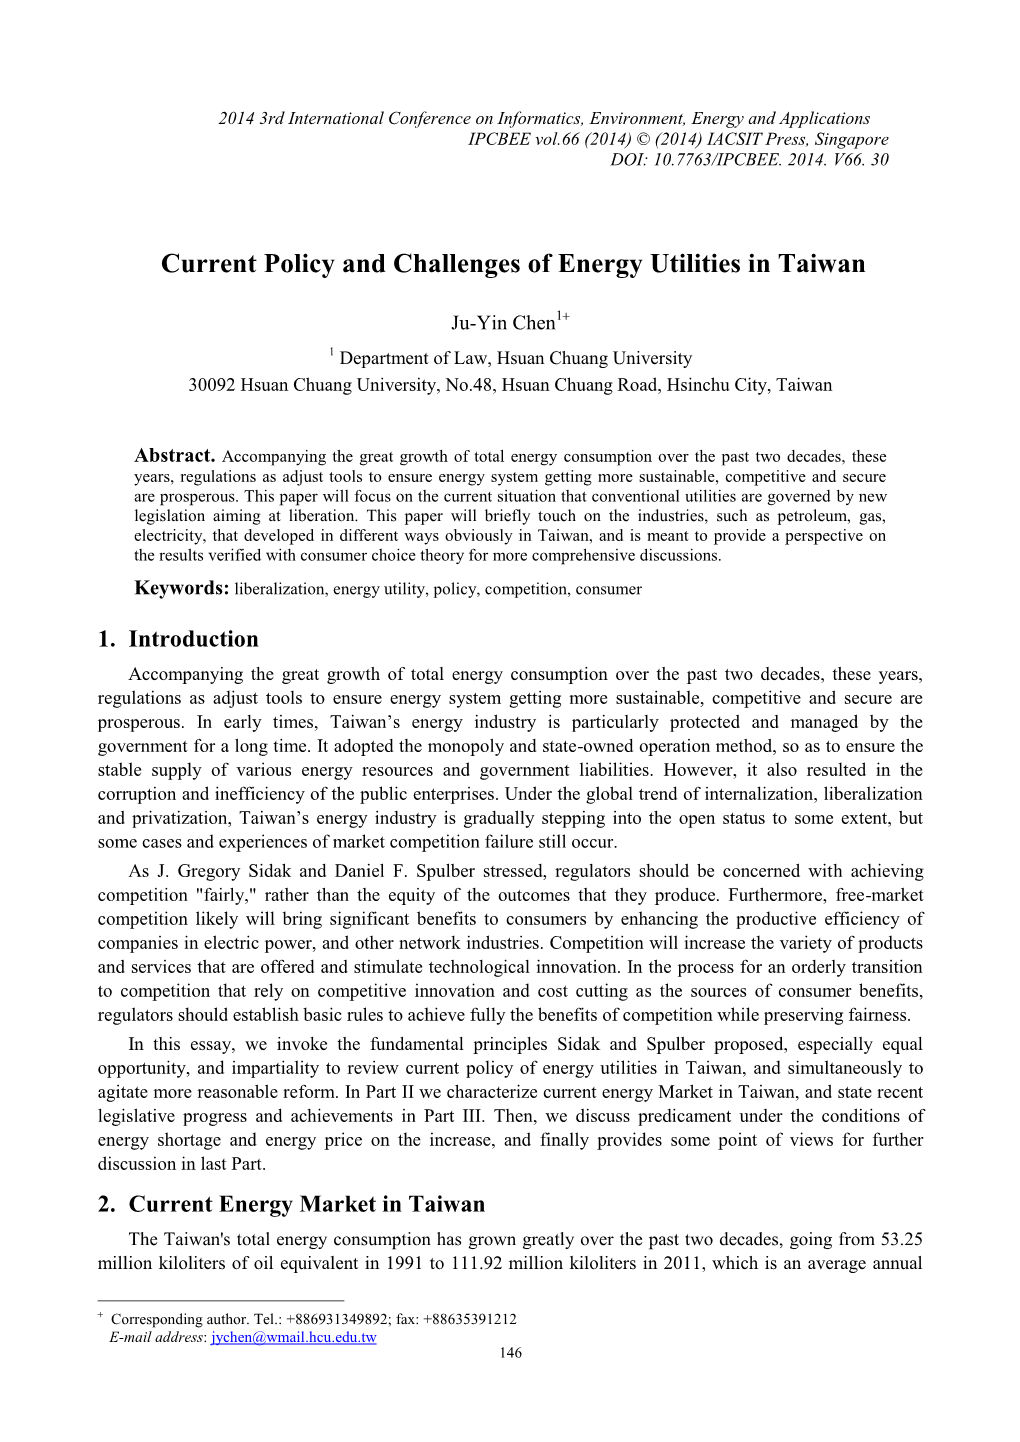 Current Policy and Challenges of Energy Utilities in Taiwan